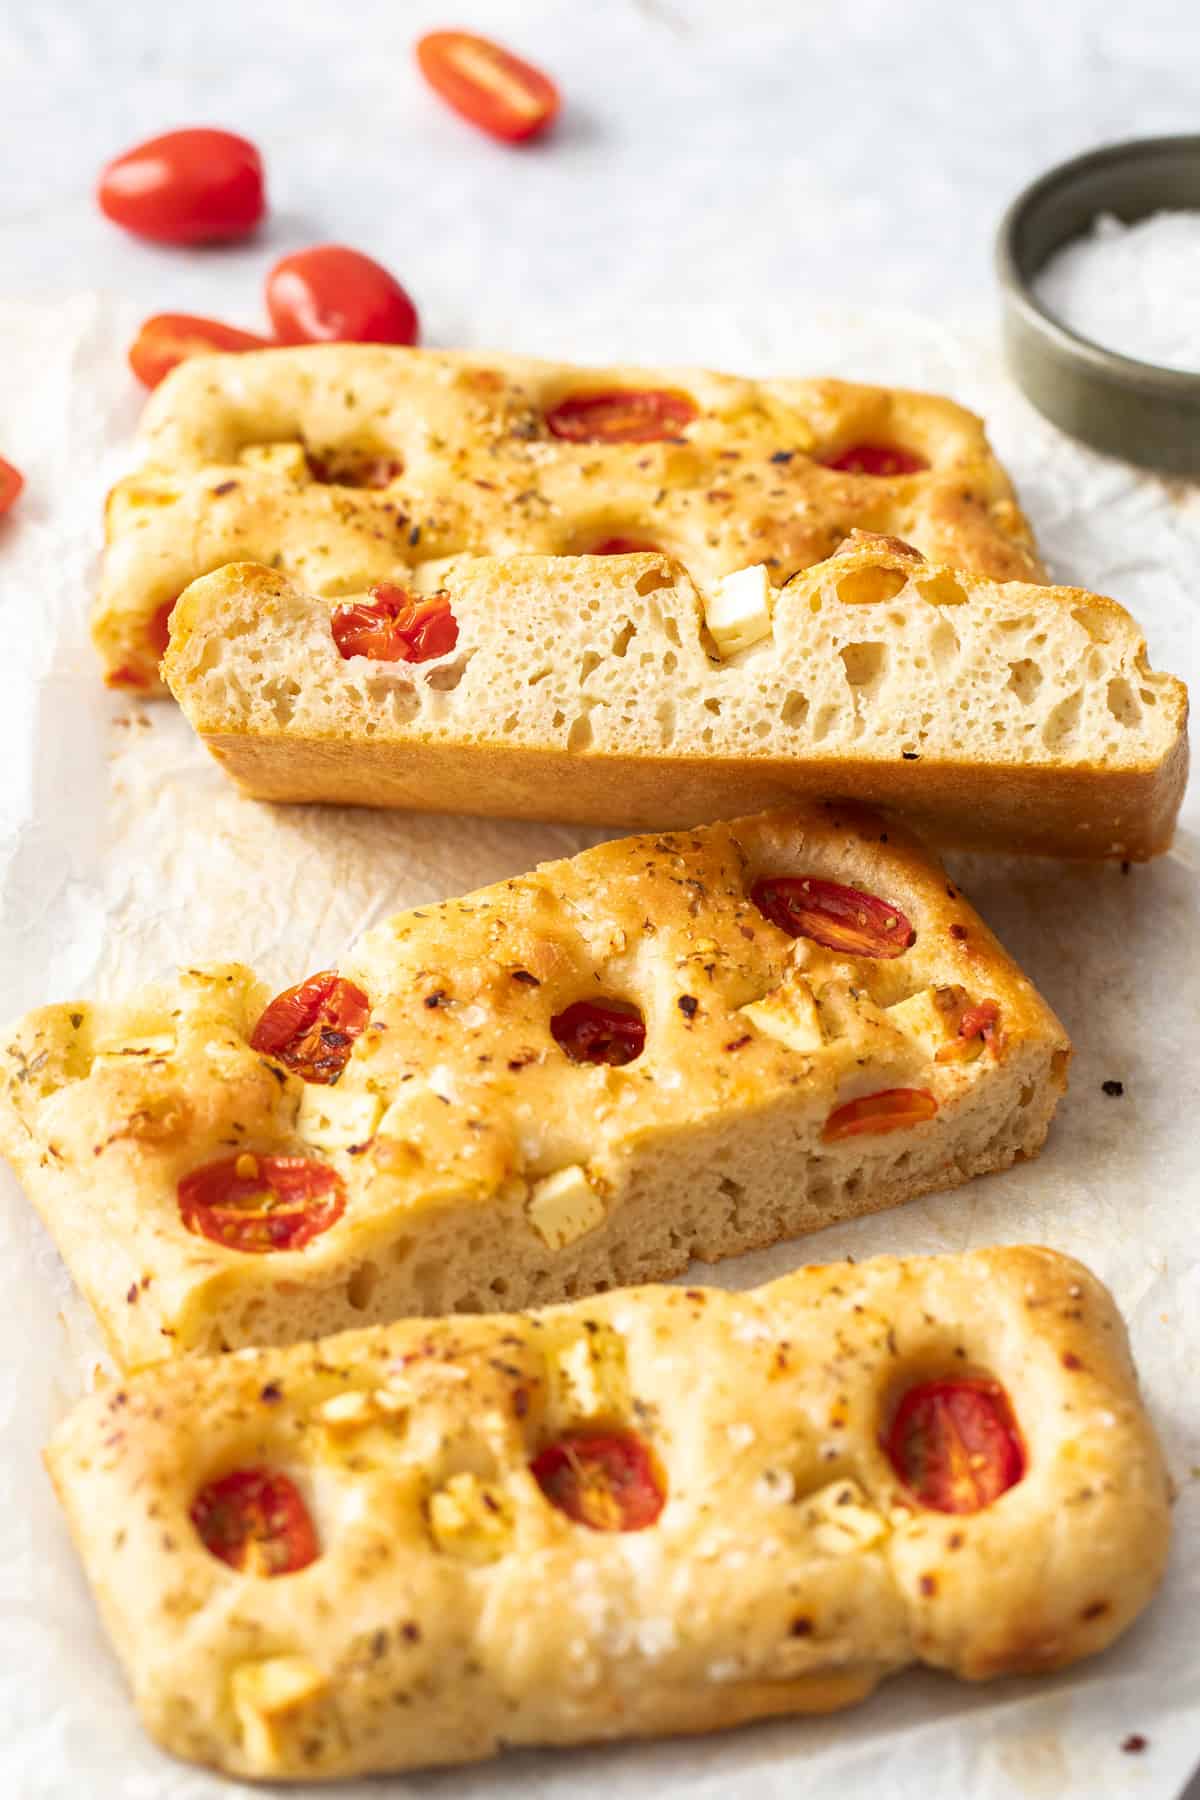 Four slices of focaccia, with one sitting on the edge to show the texture, sitting on some baking paper.